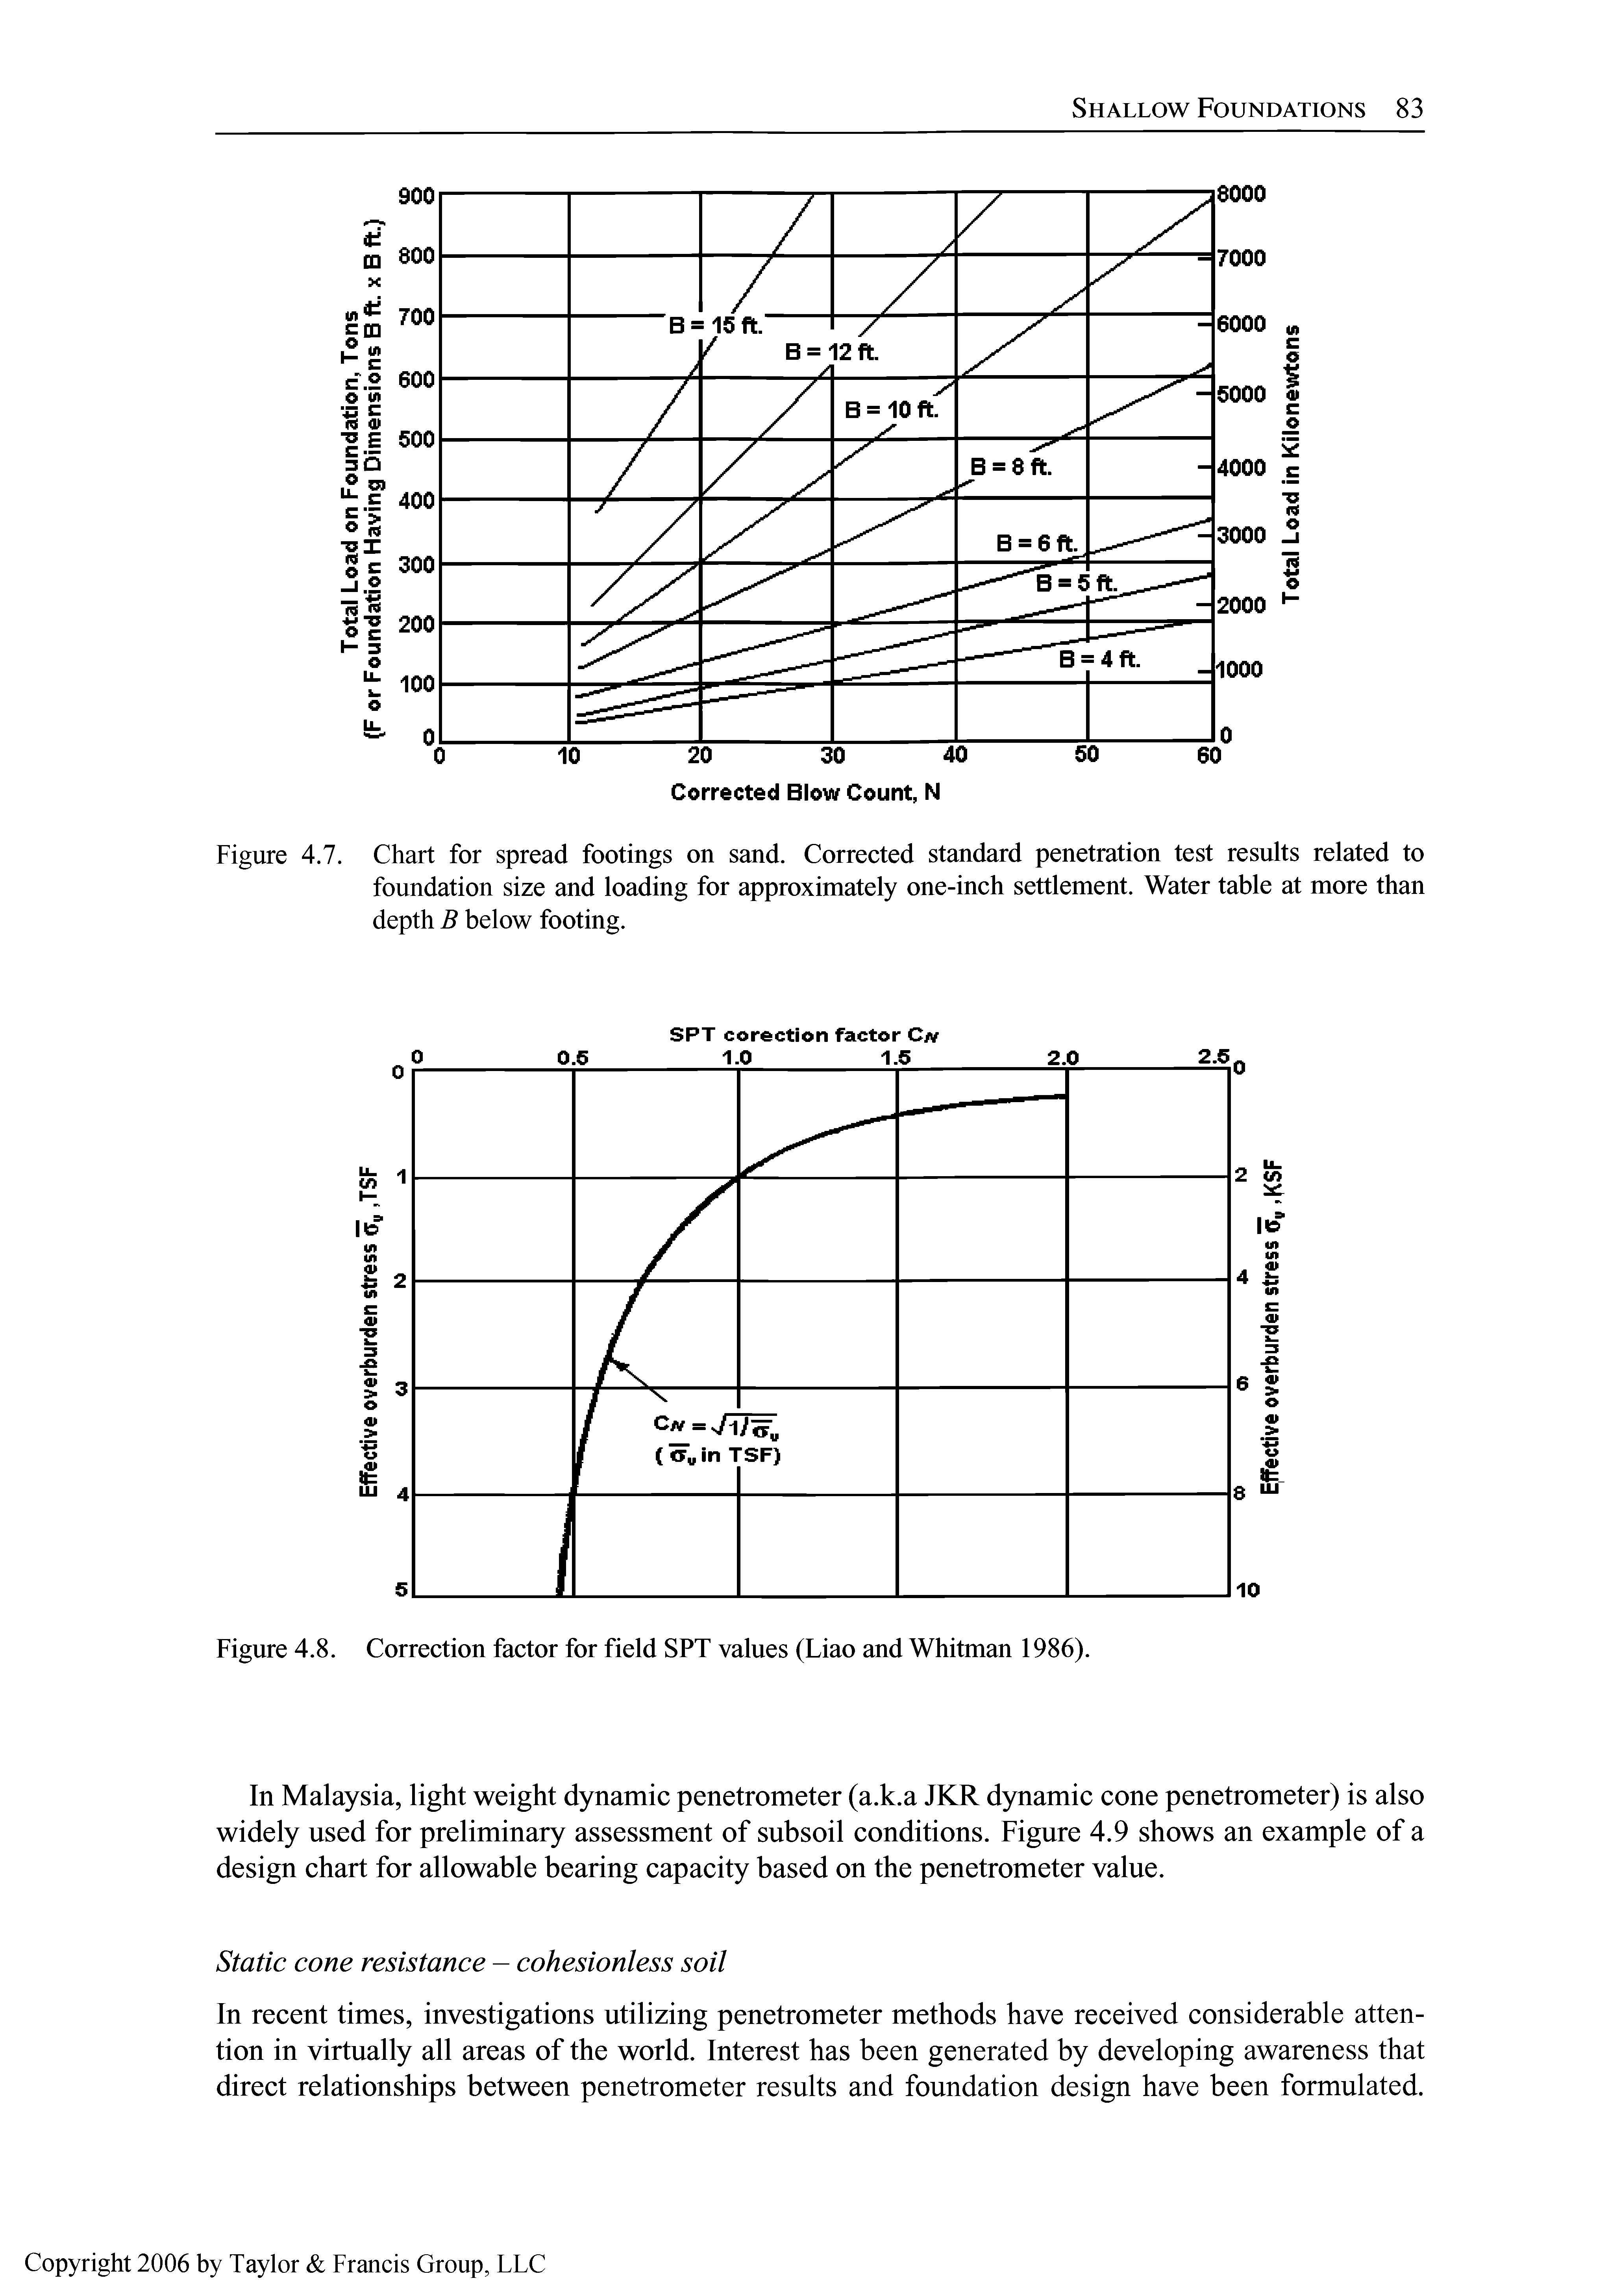 Figure 4.7. Chart for spread footings on sand. Corrected standard penetration test results related to foundation size and loading for approximately one-inch settlement. Water table at more than depth B below footing.